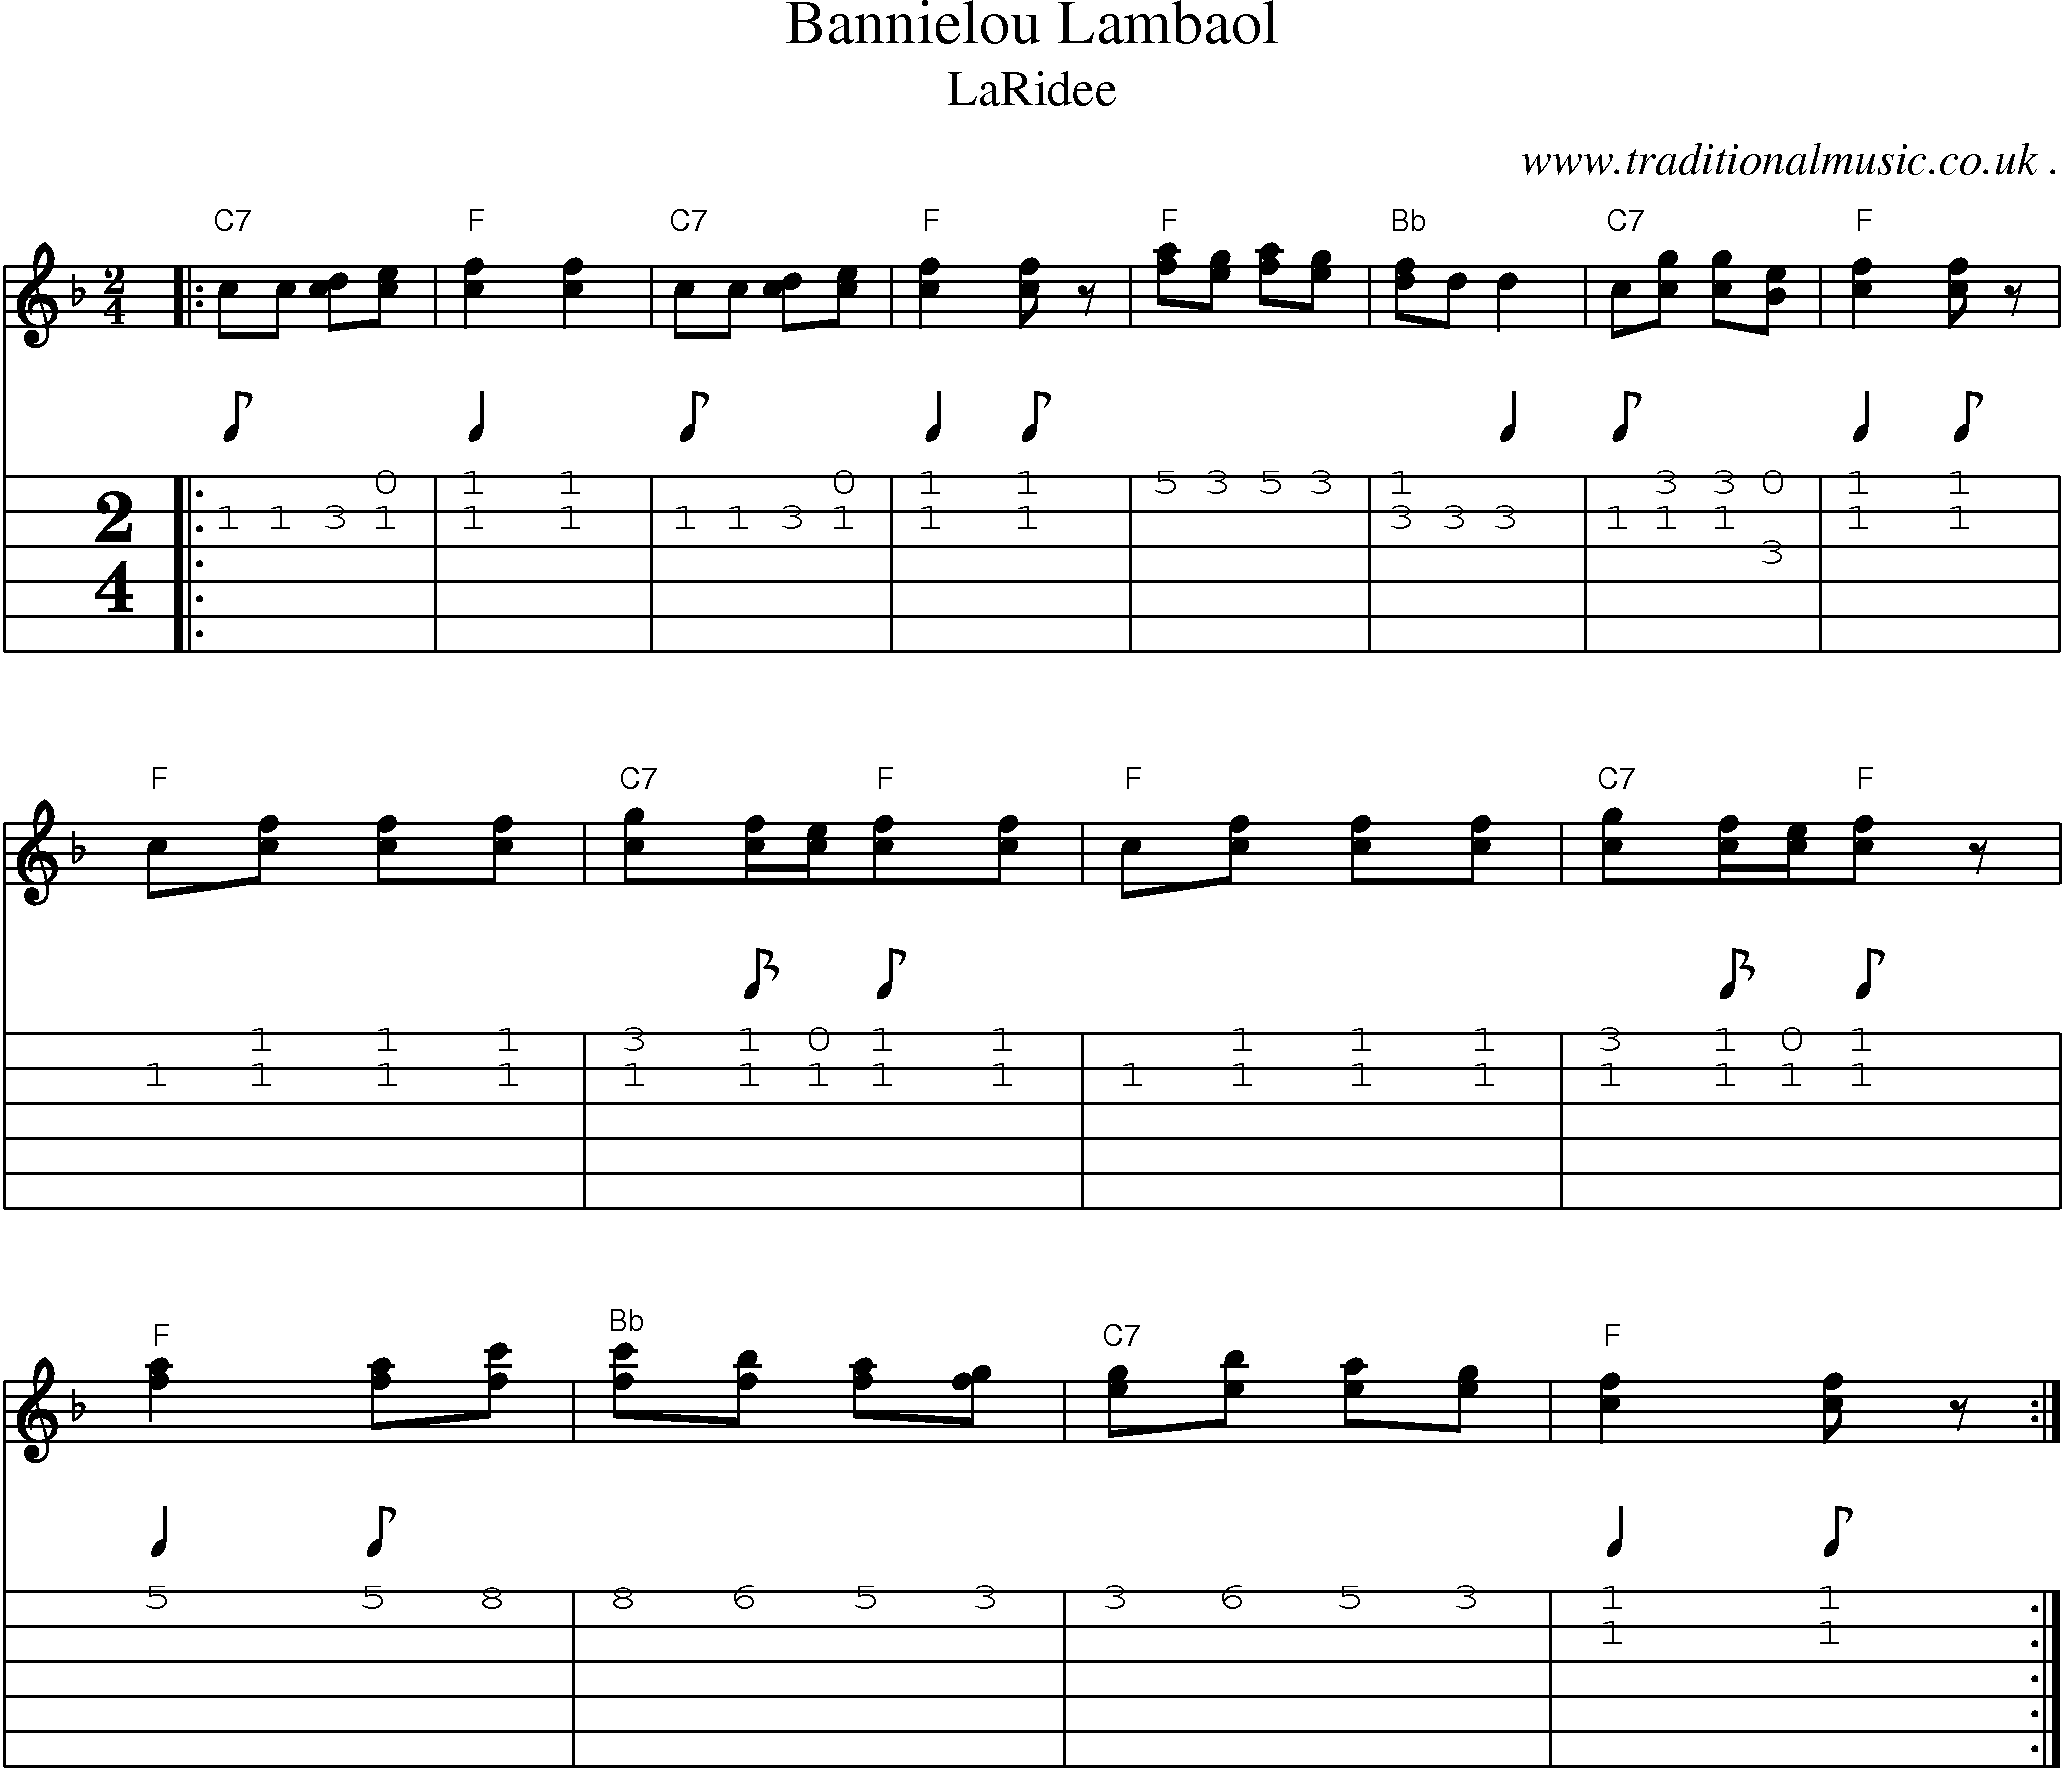 Sheet-Music and Guitar Tabs for Bannielou Lambaol